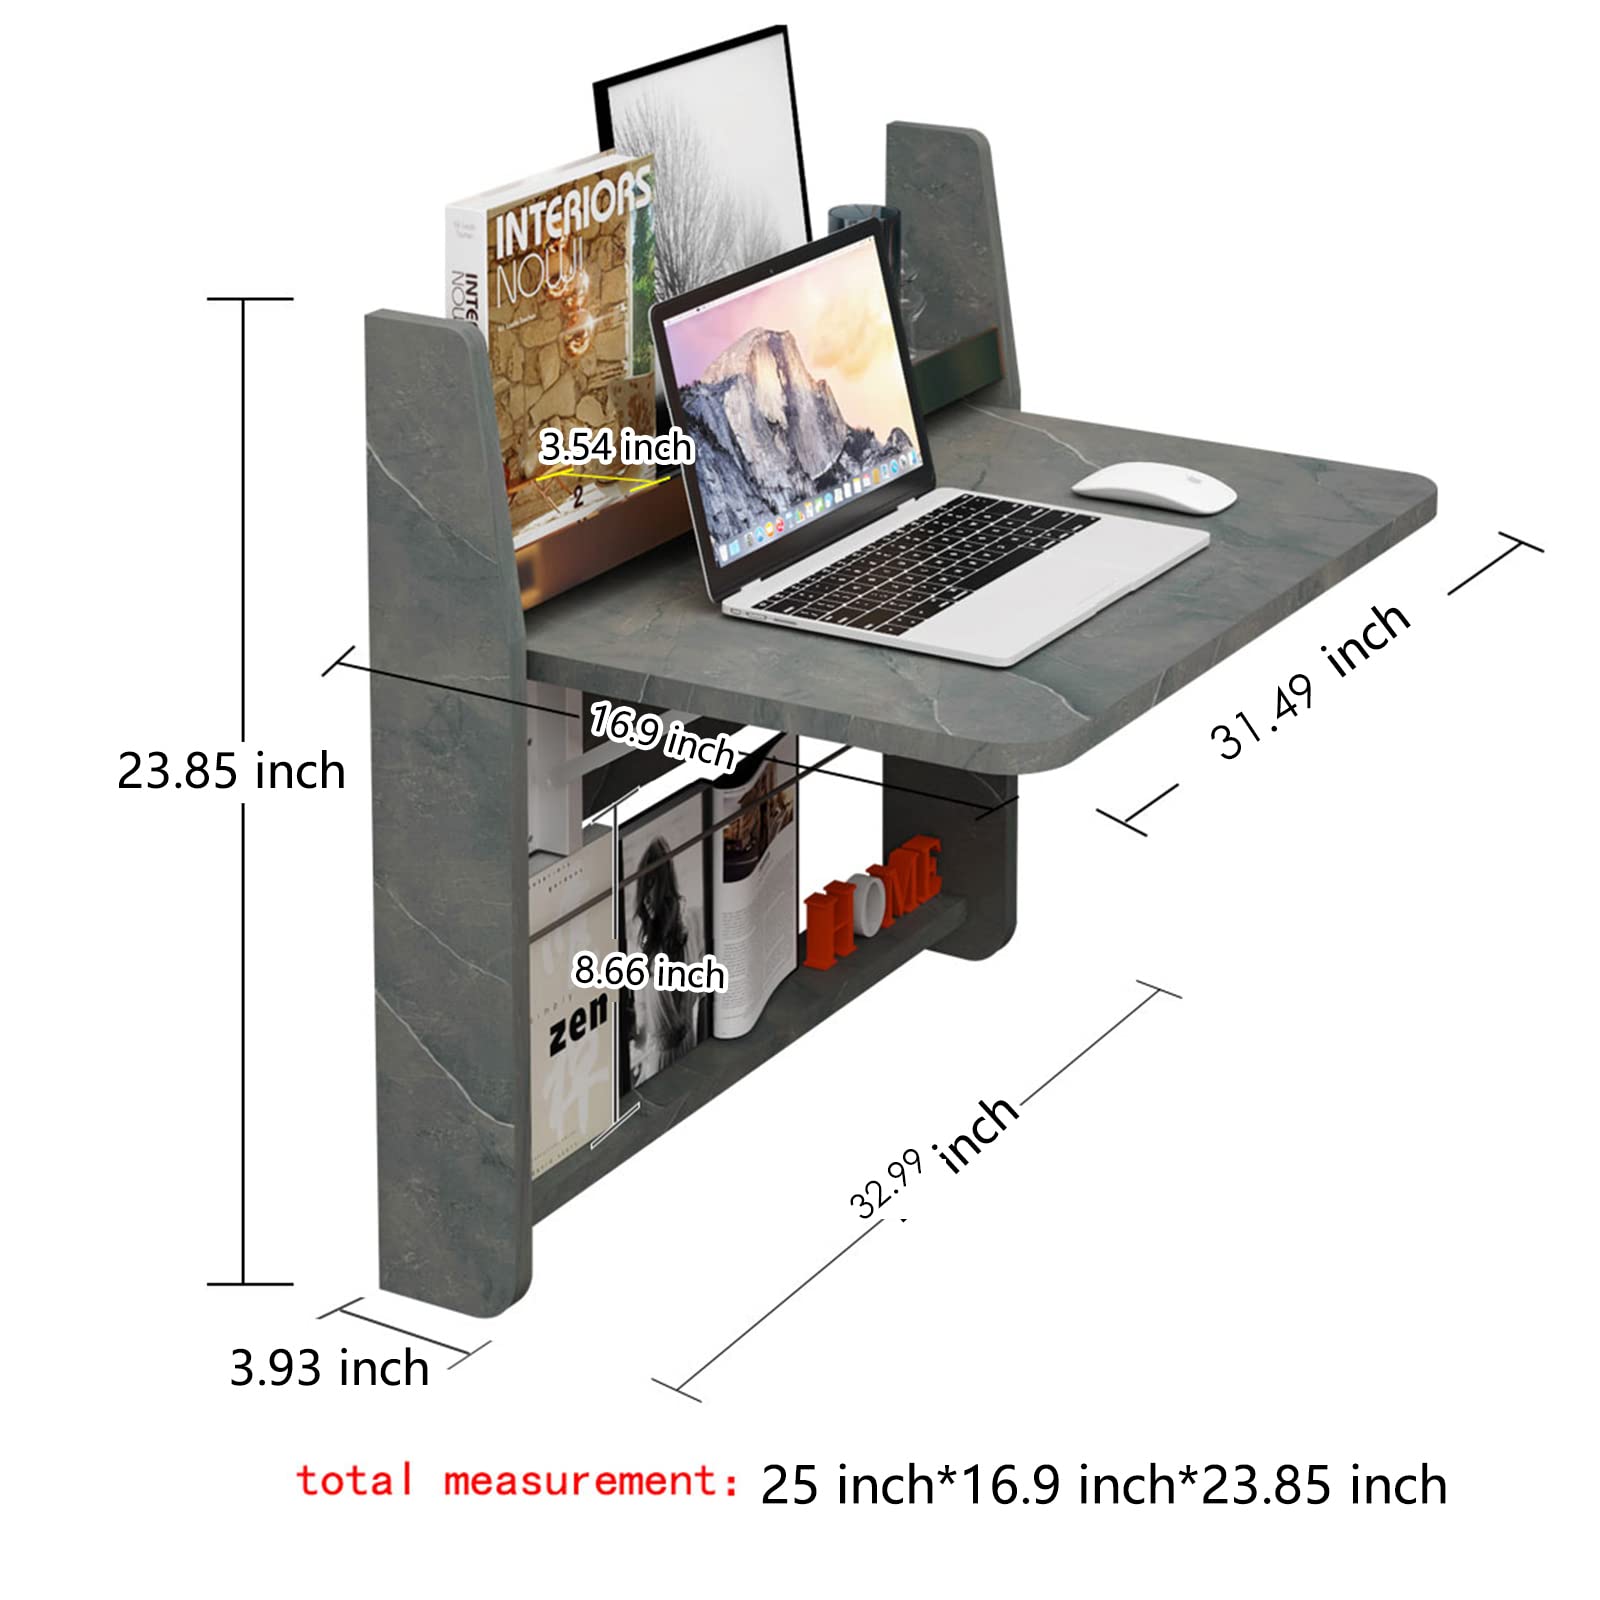 Wall Mounted Floating Folding Desk with Storage Shelf #color_pietra grey